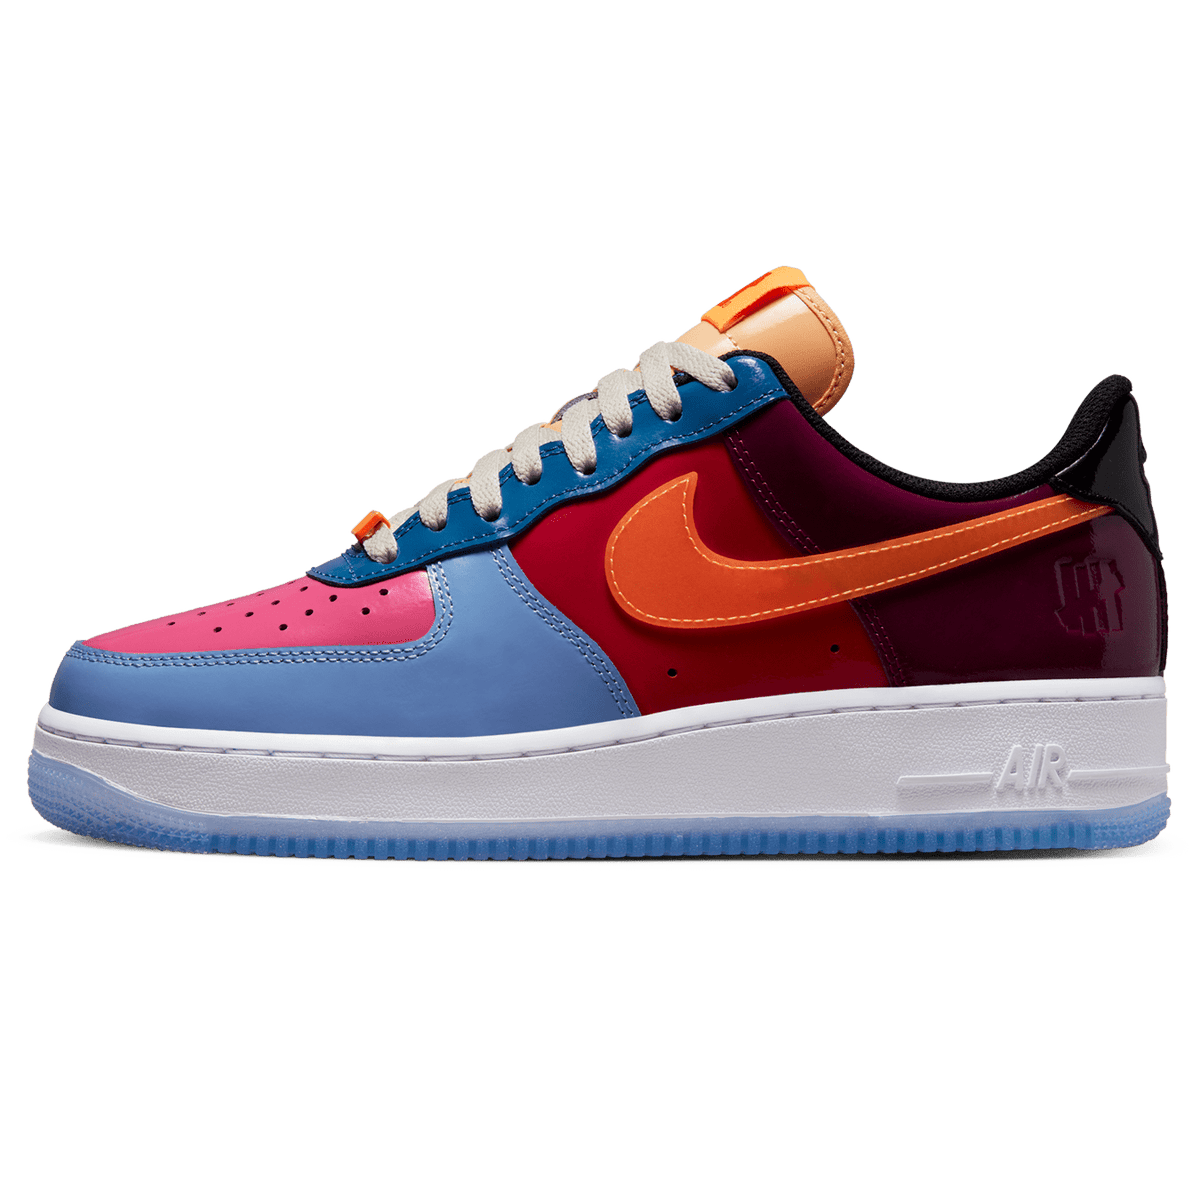 nike air force 1 low undefeated multi patent DV5255 400 1